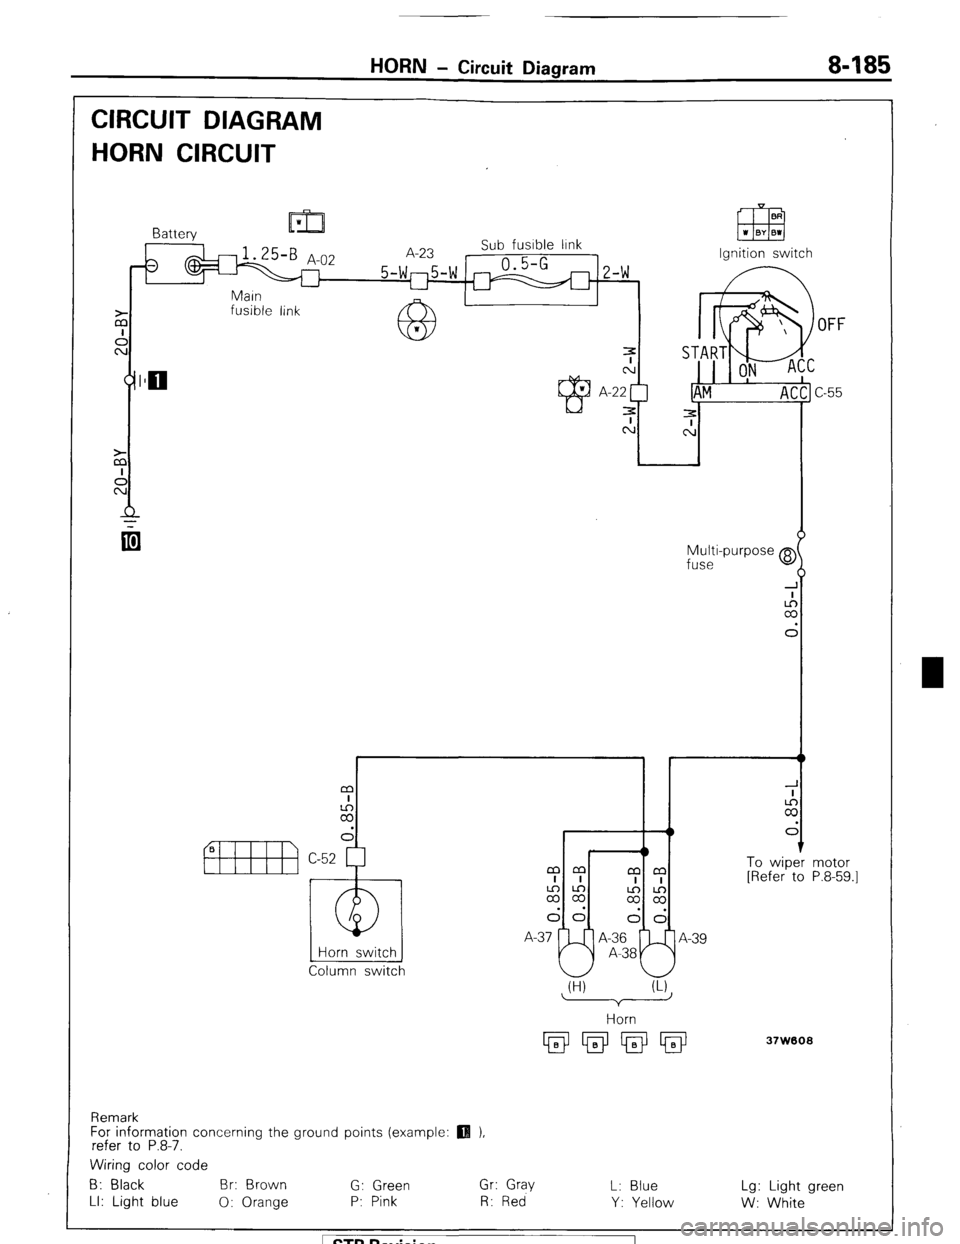 MITSUBISHI MONTERO 1987 1.G Workshop Manual HORN - Circuit Diagram 8485 
CIRCUIT DIAGRAM 
HORN CIRCUIT 
fusible link 
OFF 
Multi-purpose @ 
fuse 
I r t 
m 
I 
2 
d 
1 To wiper 
[Refer to 
Horn switch 
Column switch mm 
mm 
I I 
I I 
2% 
$2 
dd 